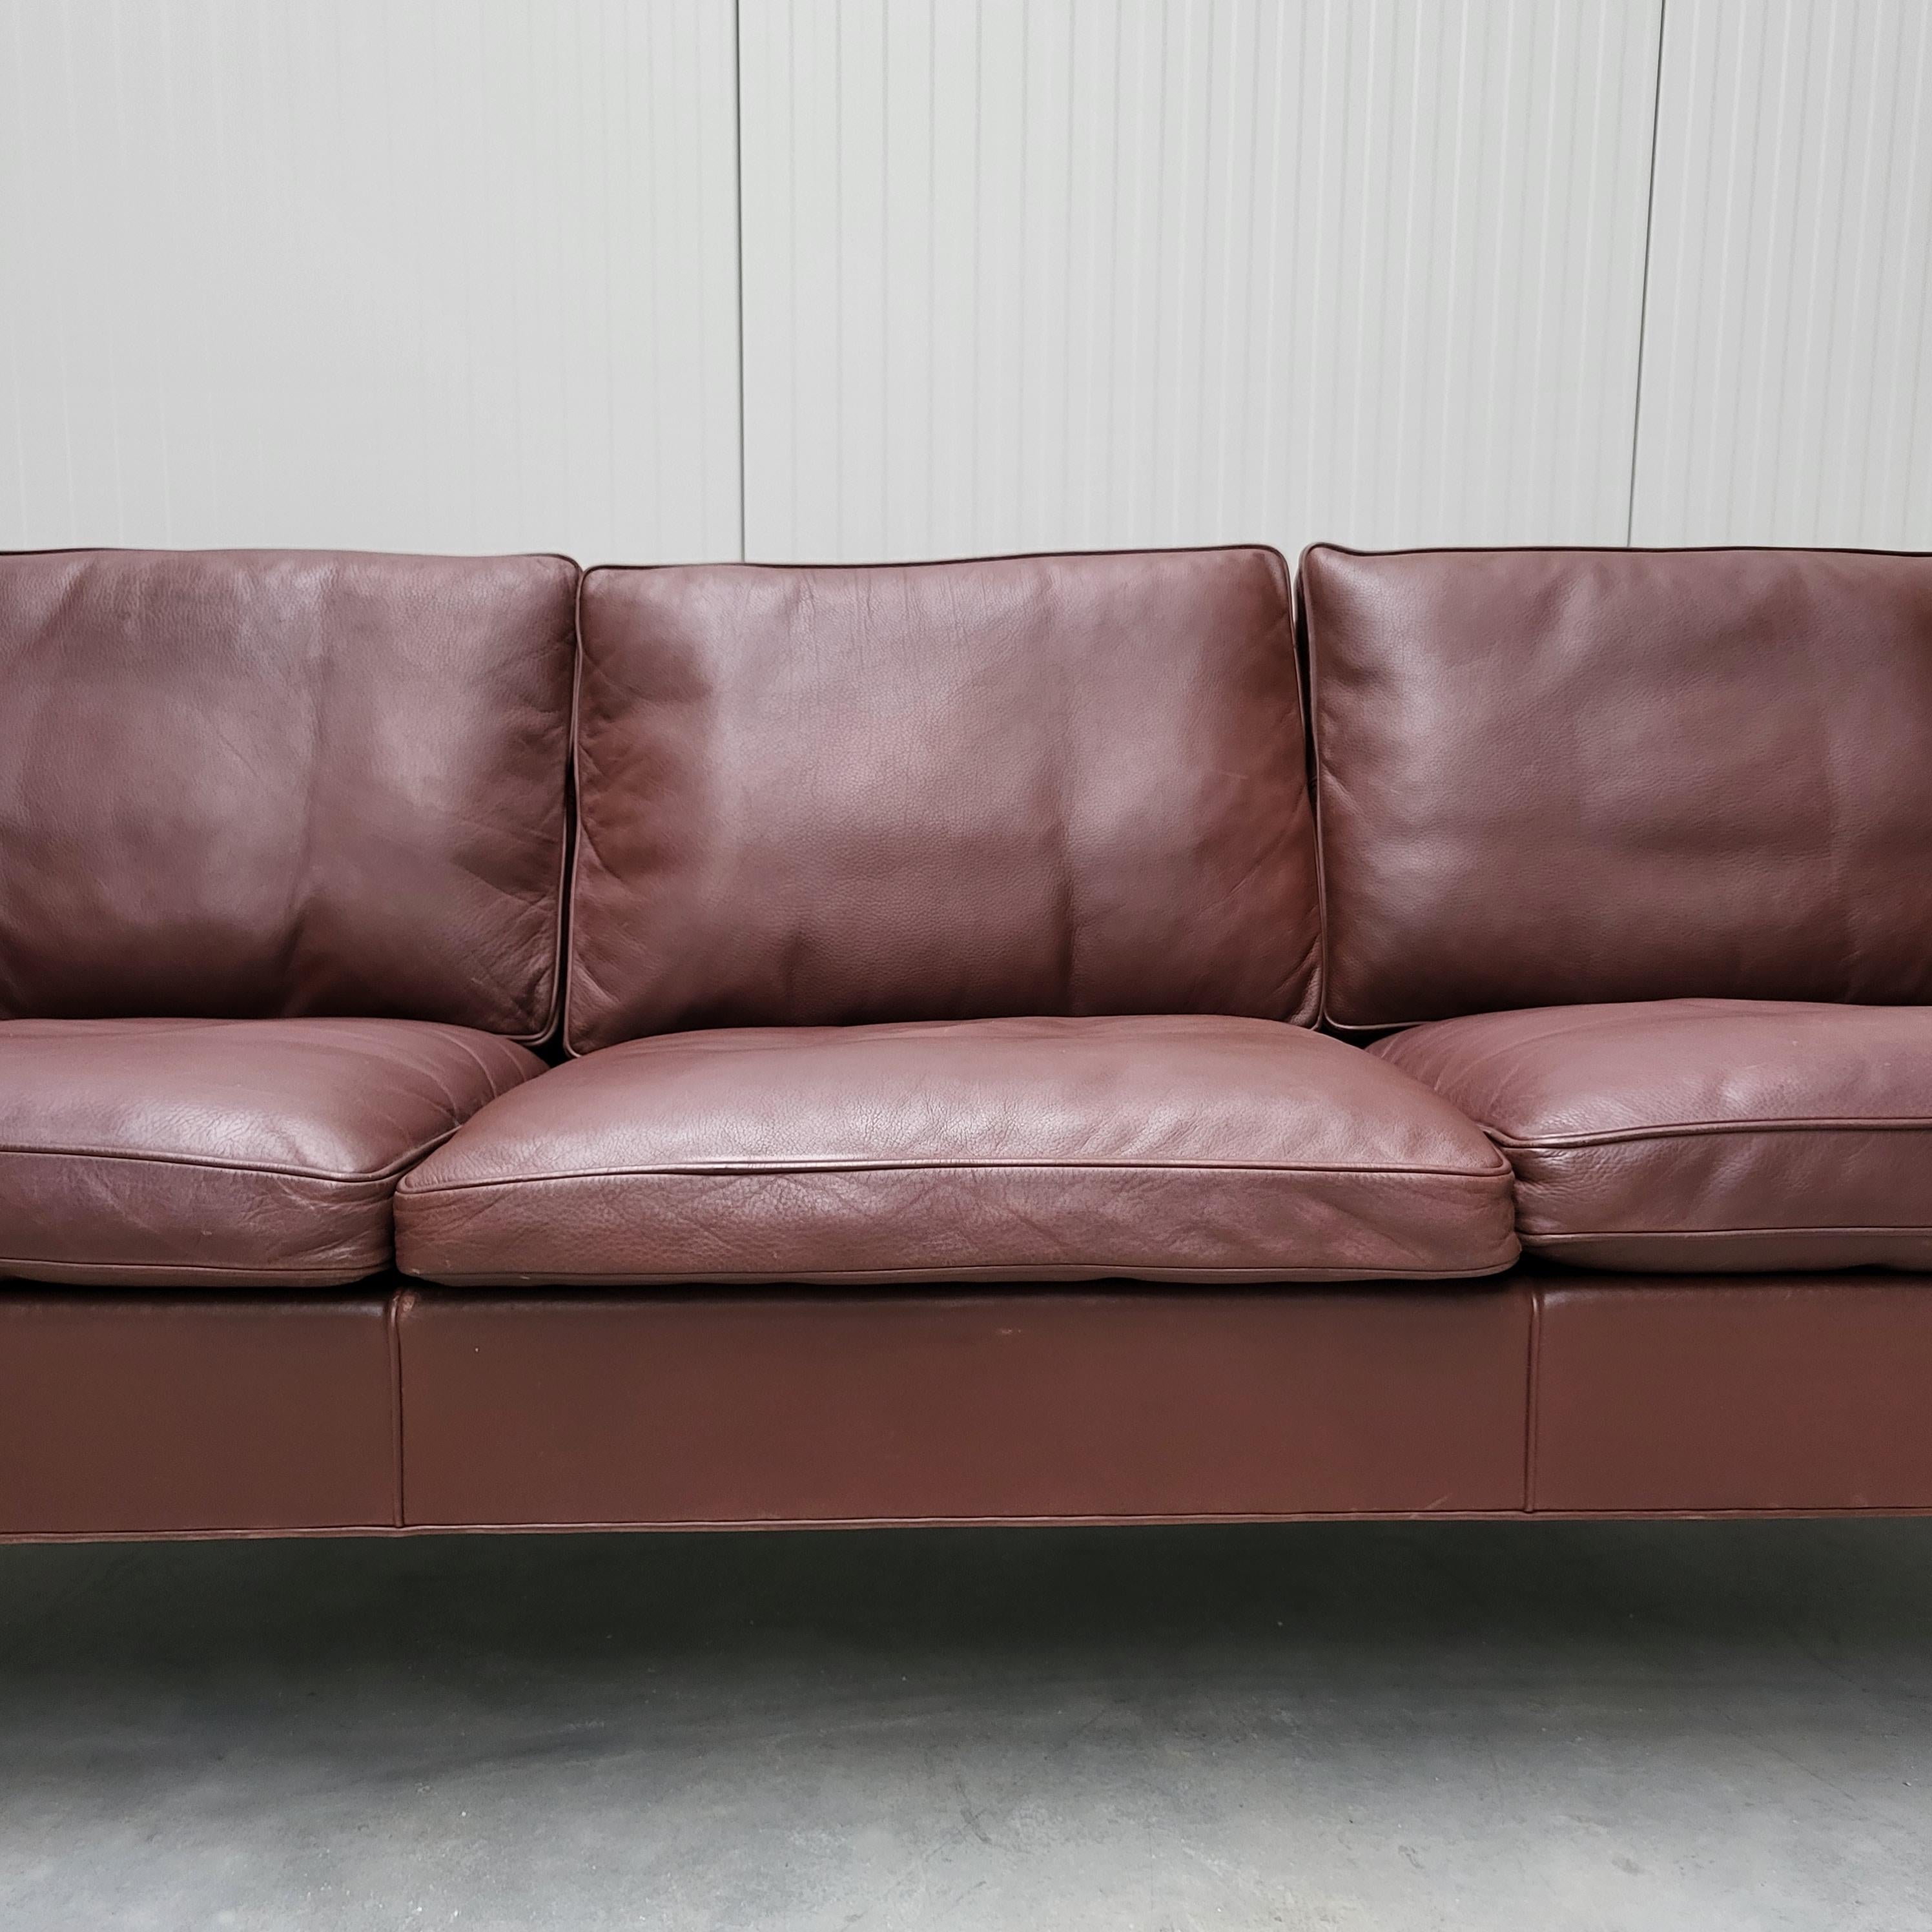 Hand-Crafted Børge Mogensen for Fredericia Sofa 3-Seater Mod. 2213, Denmark 1970s